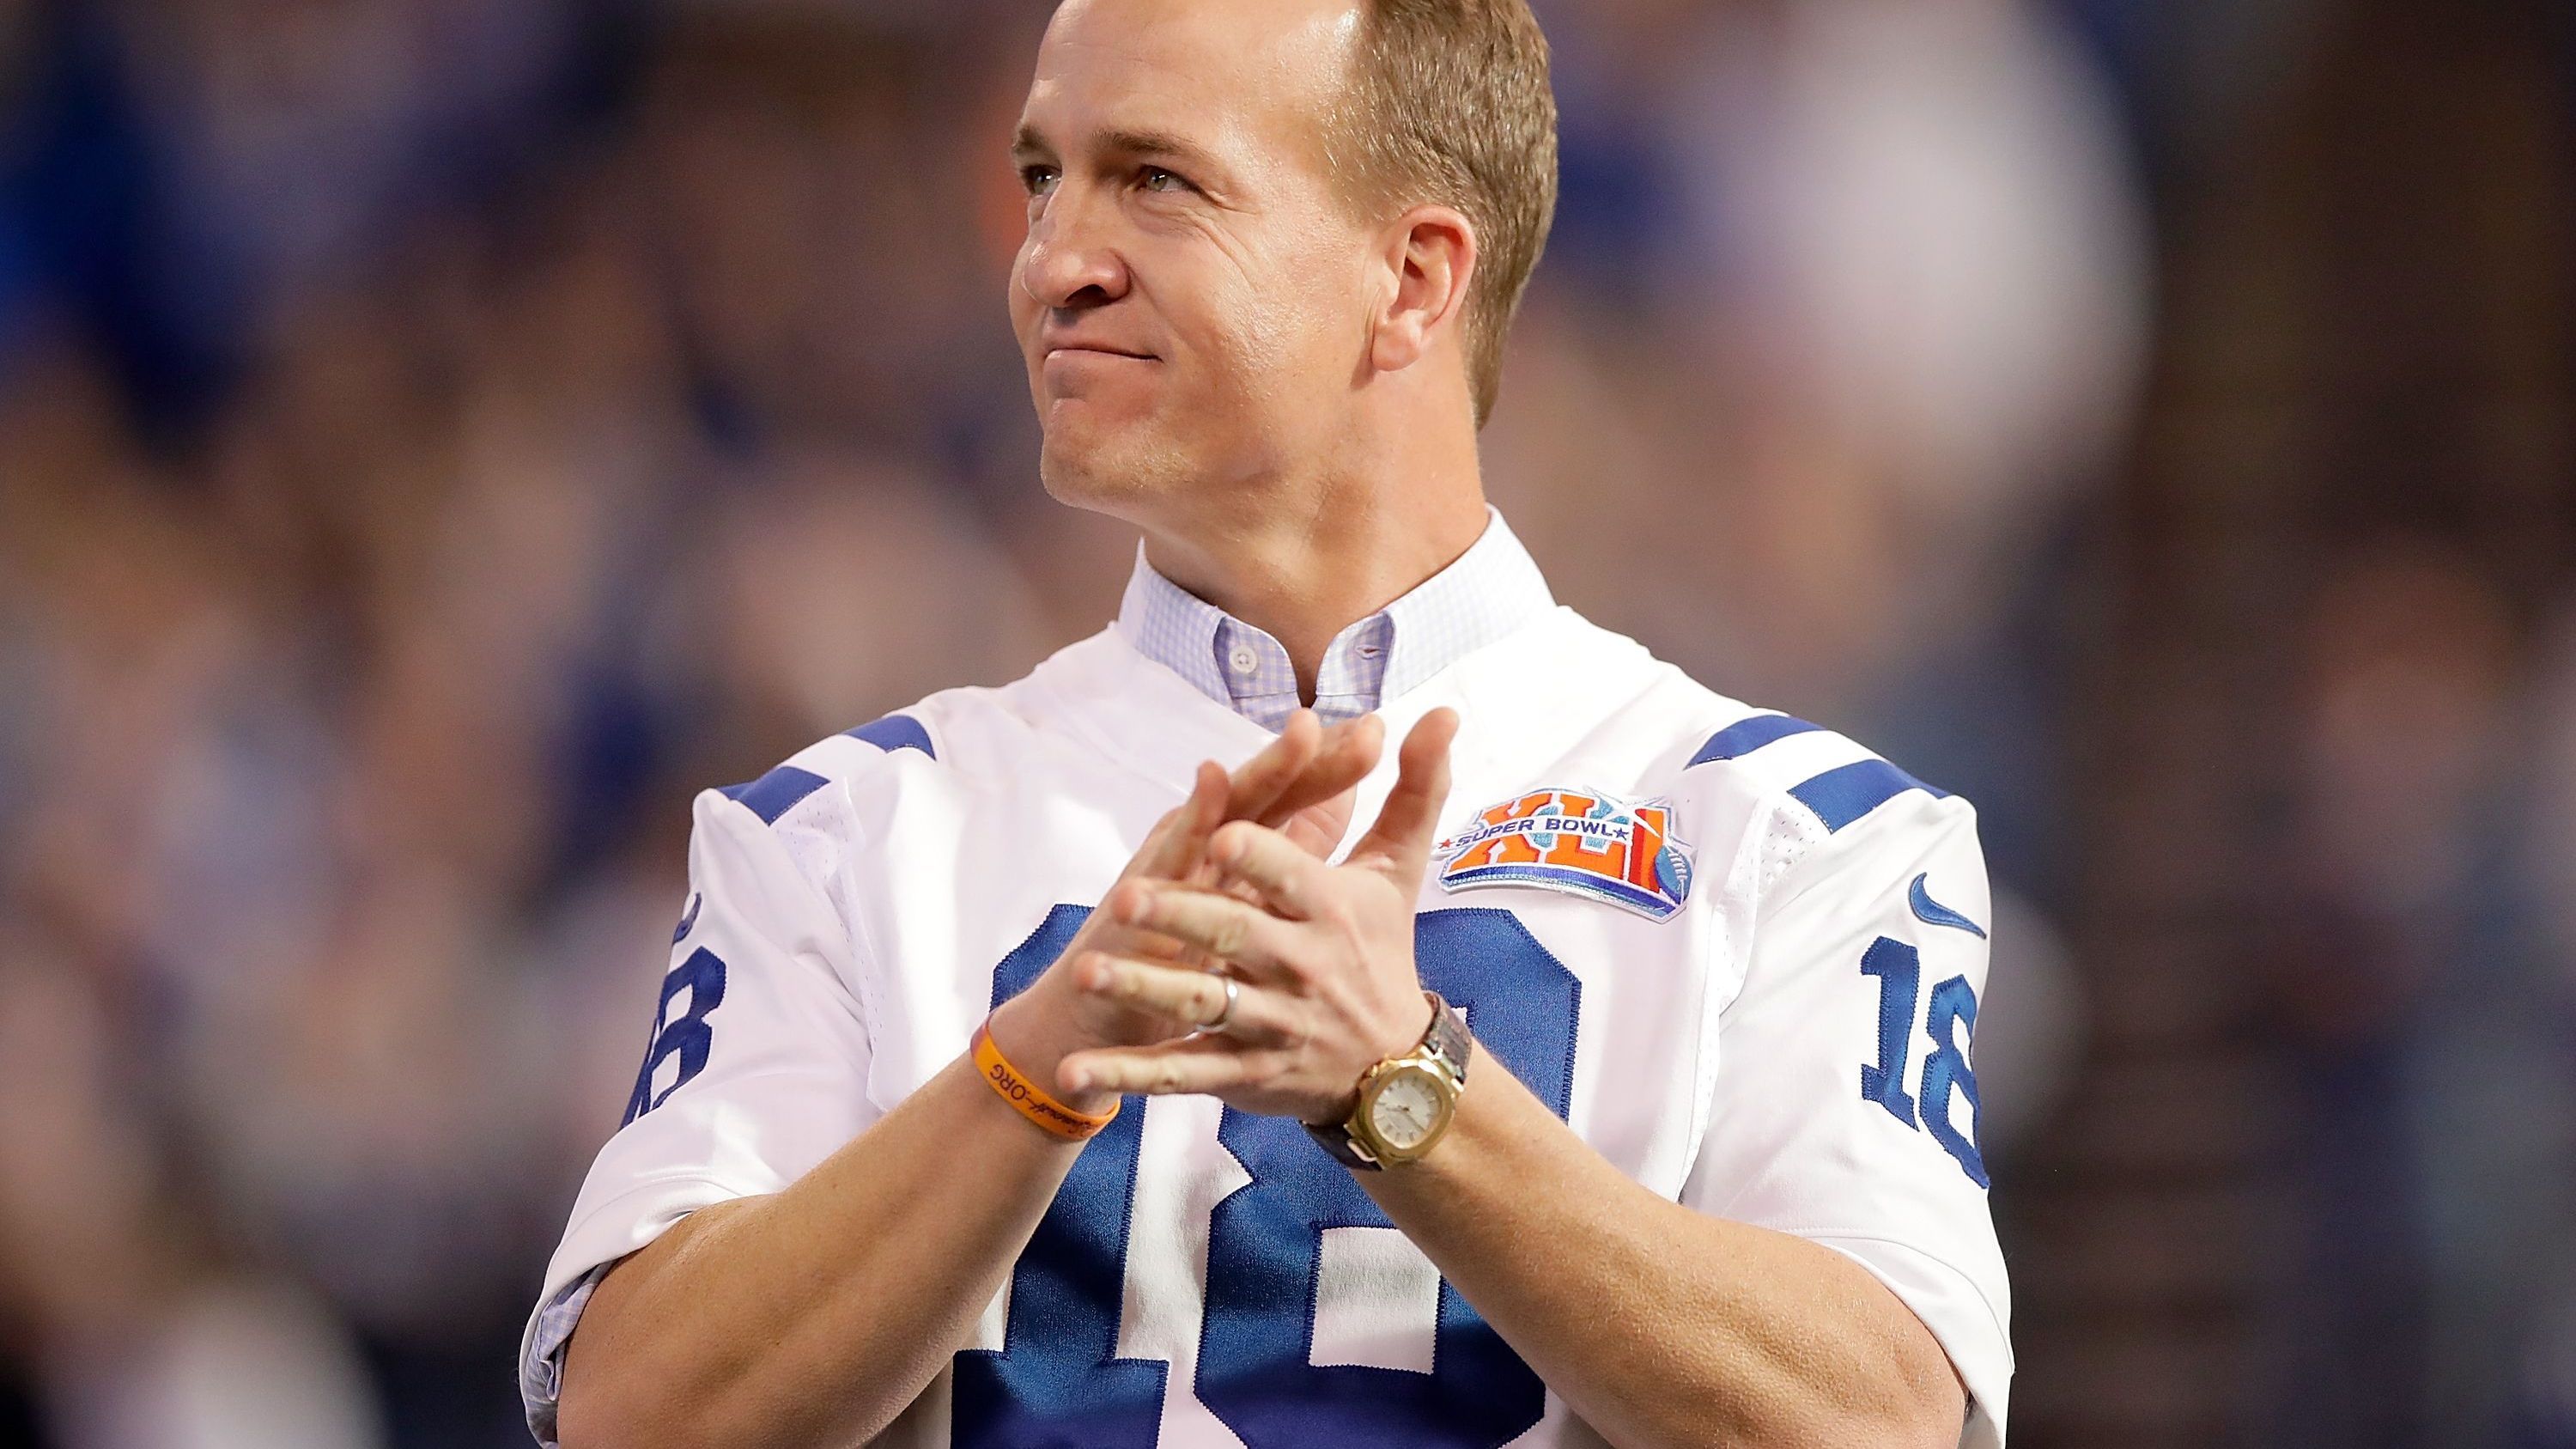 <strong>Indianapolis Colts - Peyton Manning</strong><br>Passing-Yards: 54.828<br>Passing-Touchdowns: 399<br>Jahre im Team: 13&nbsp;<br>Absolvierte Spiele: 208